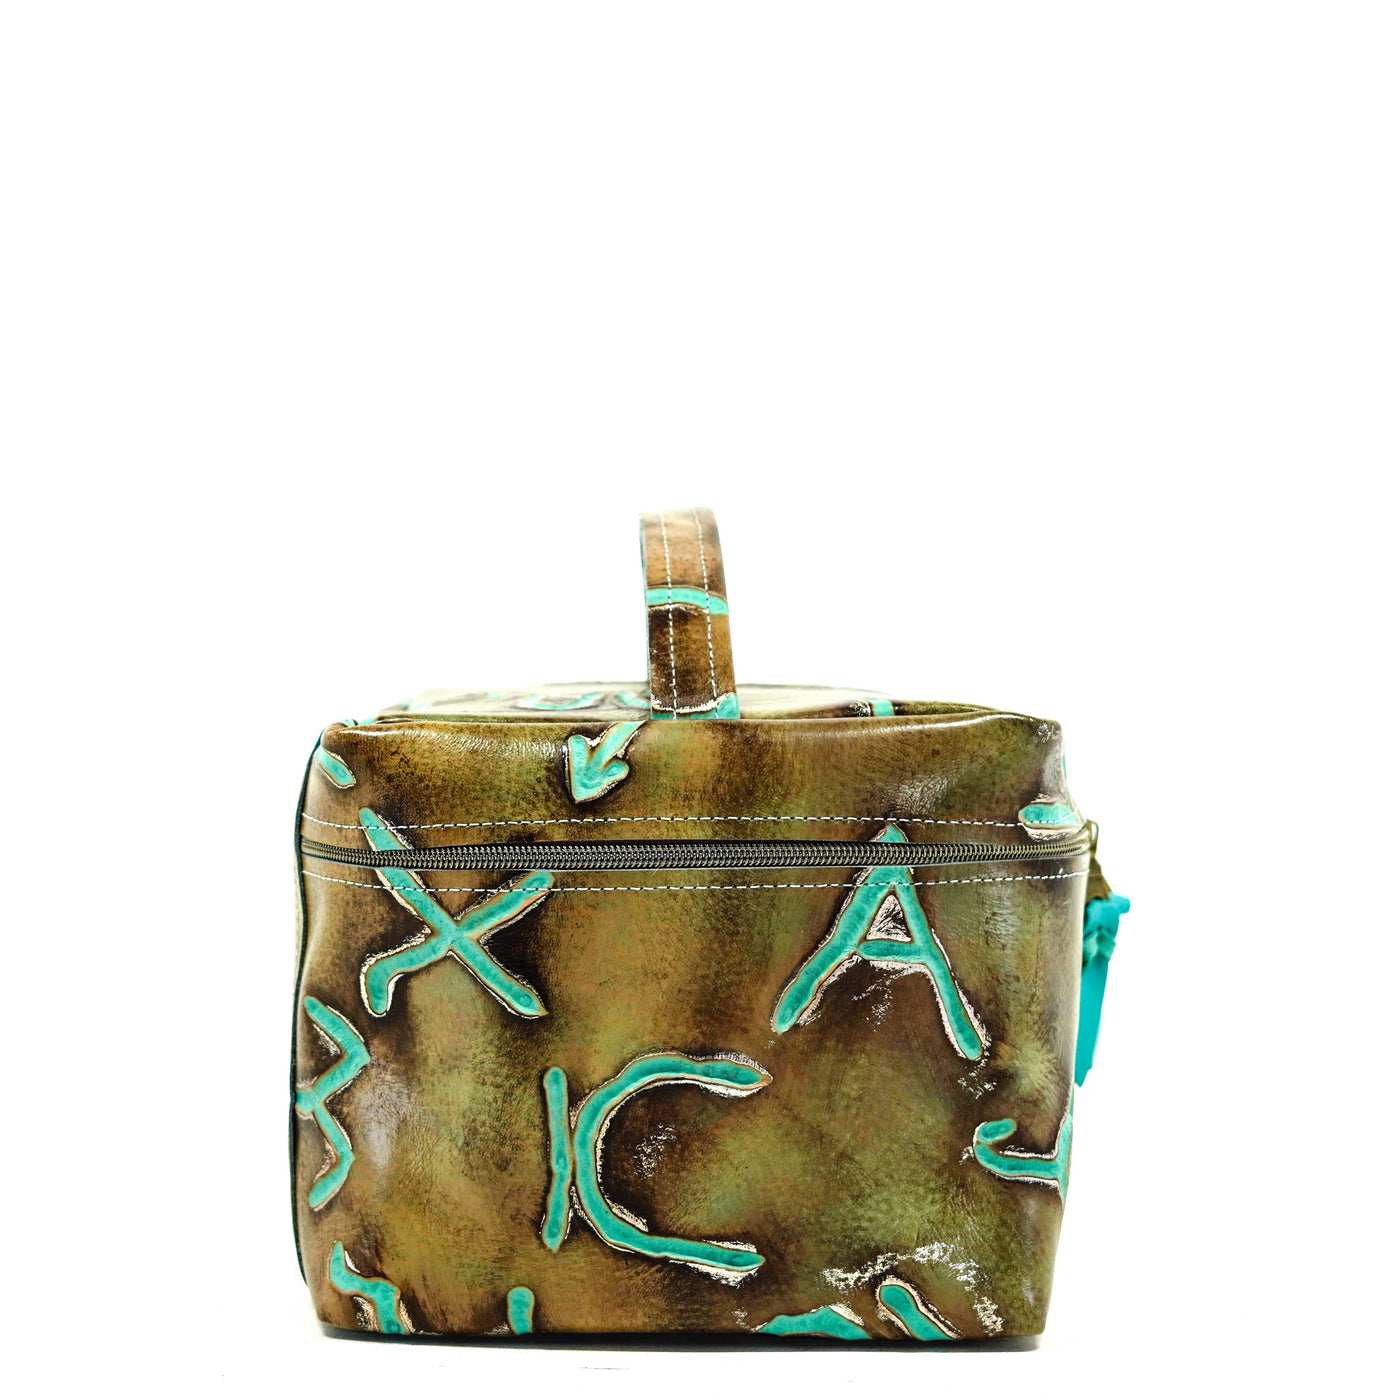 Train Station - All Embossed w/ Turquoise Brands-Train Station-Western-Cowhide-Bags-Handmade-Products-Gifts-Dancing Cactus Designs